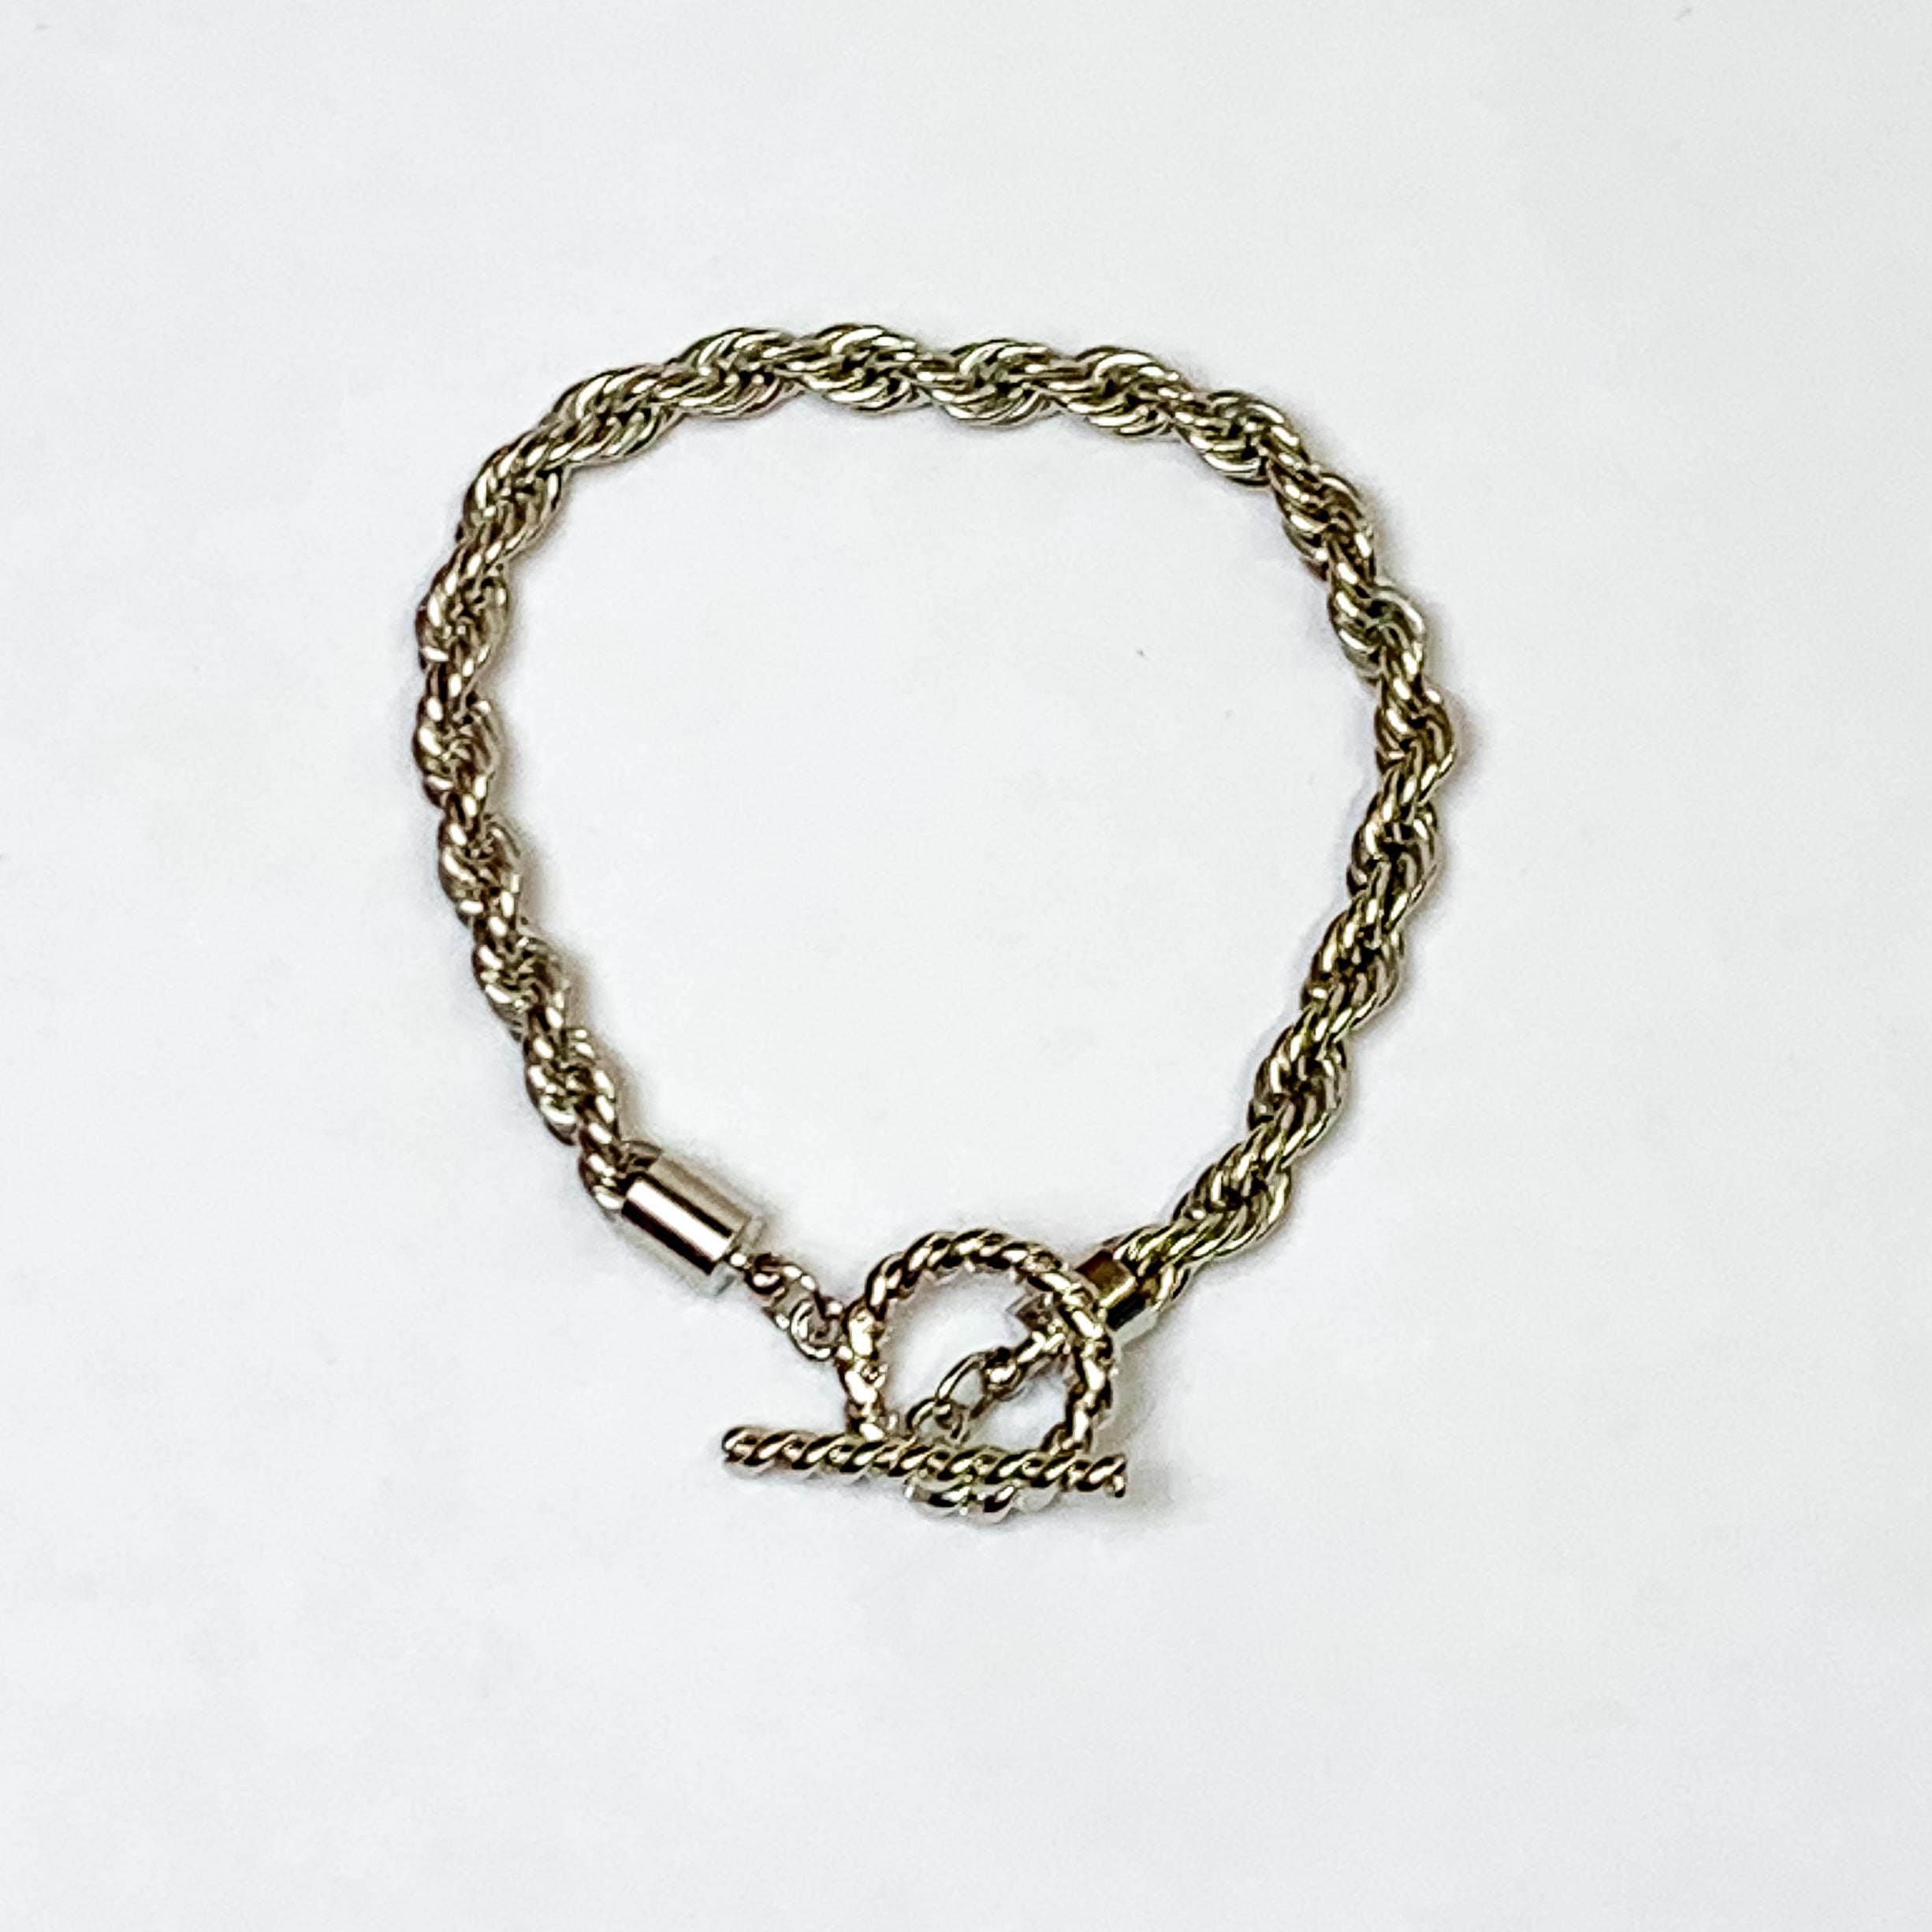 Silver Tone Rope Chain Toggle Bracelet - Giddy Up Glamour Boutique